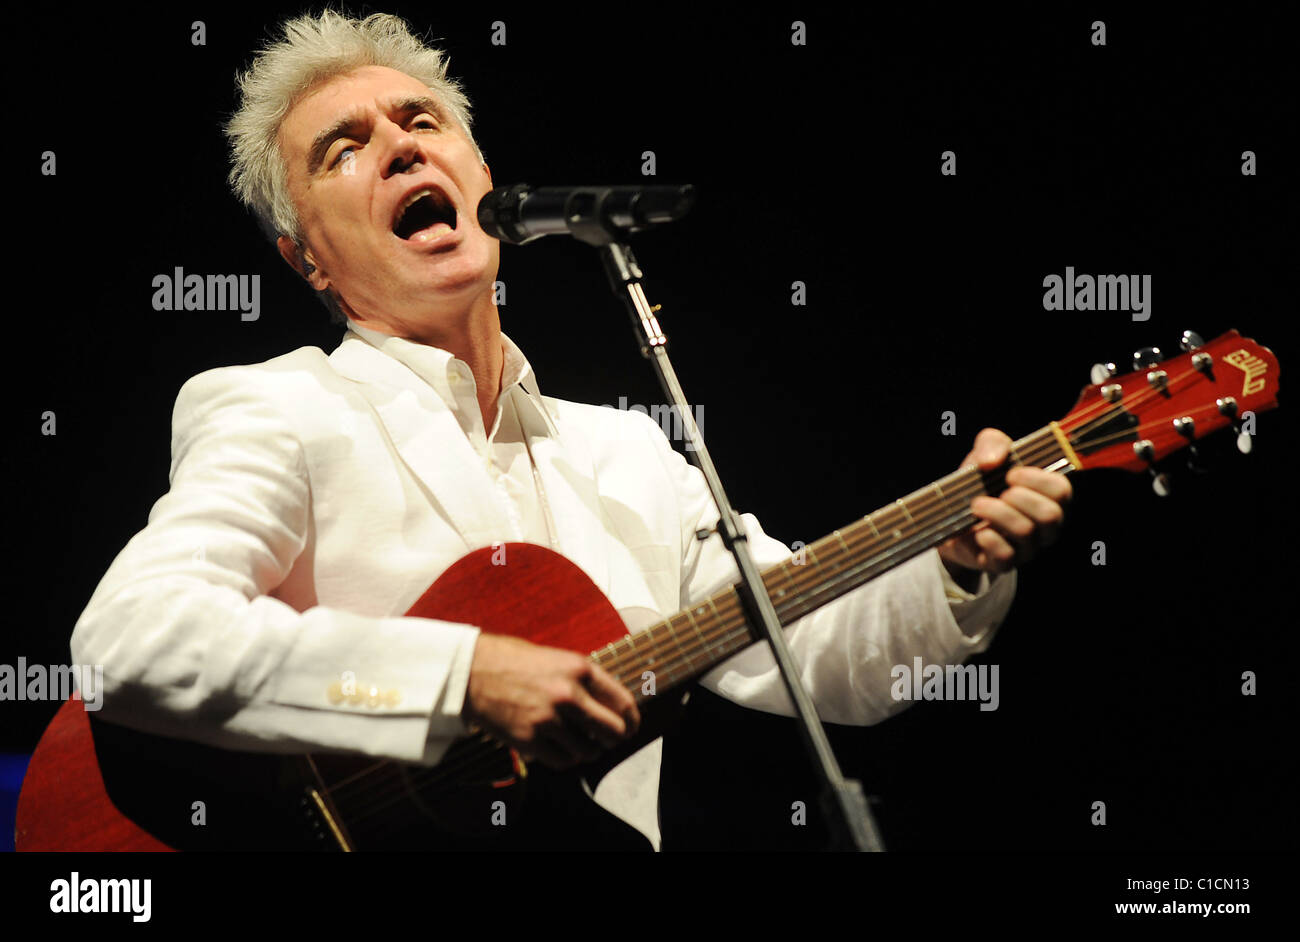 David Byrne performs at the Royal Festival Hall London,England-12.04.09 Stock Photo